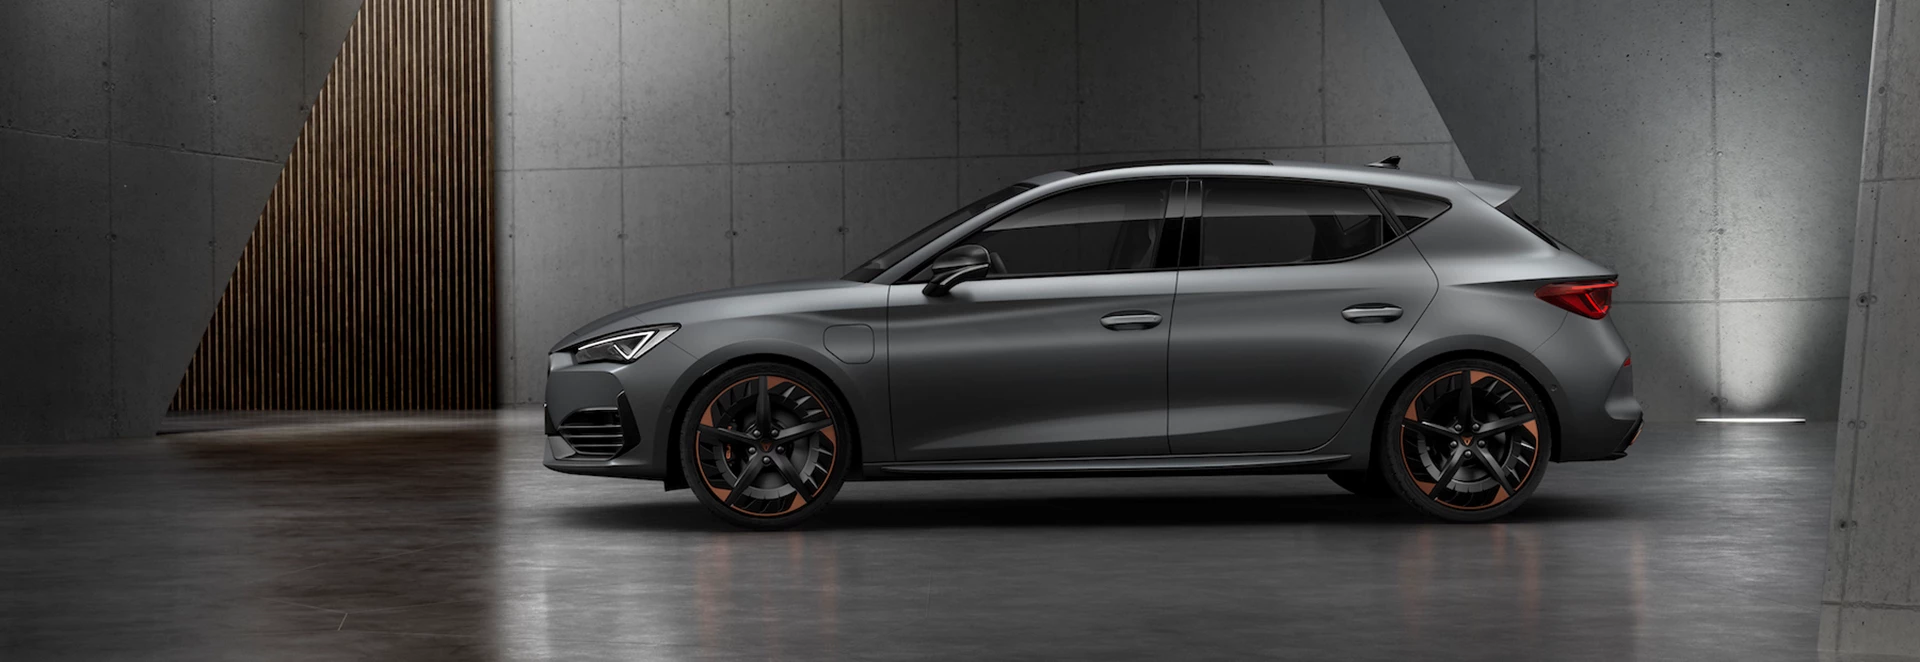 Cupra Leon: Here’s what you need to know 